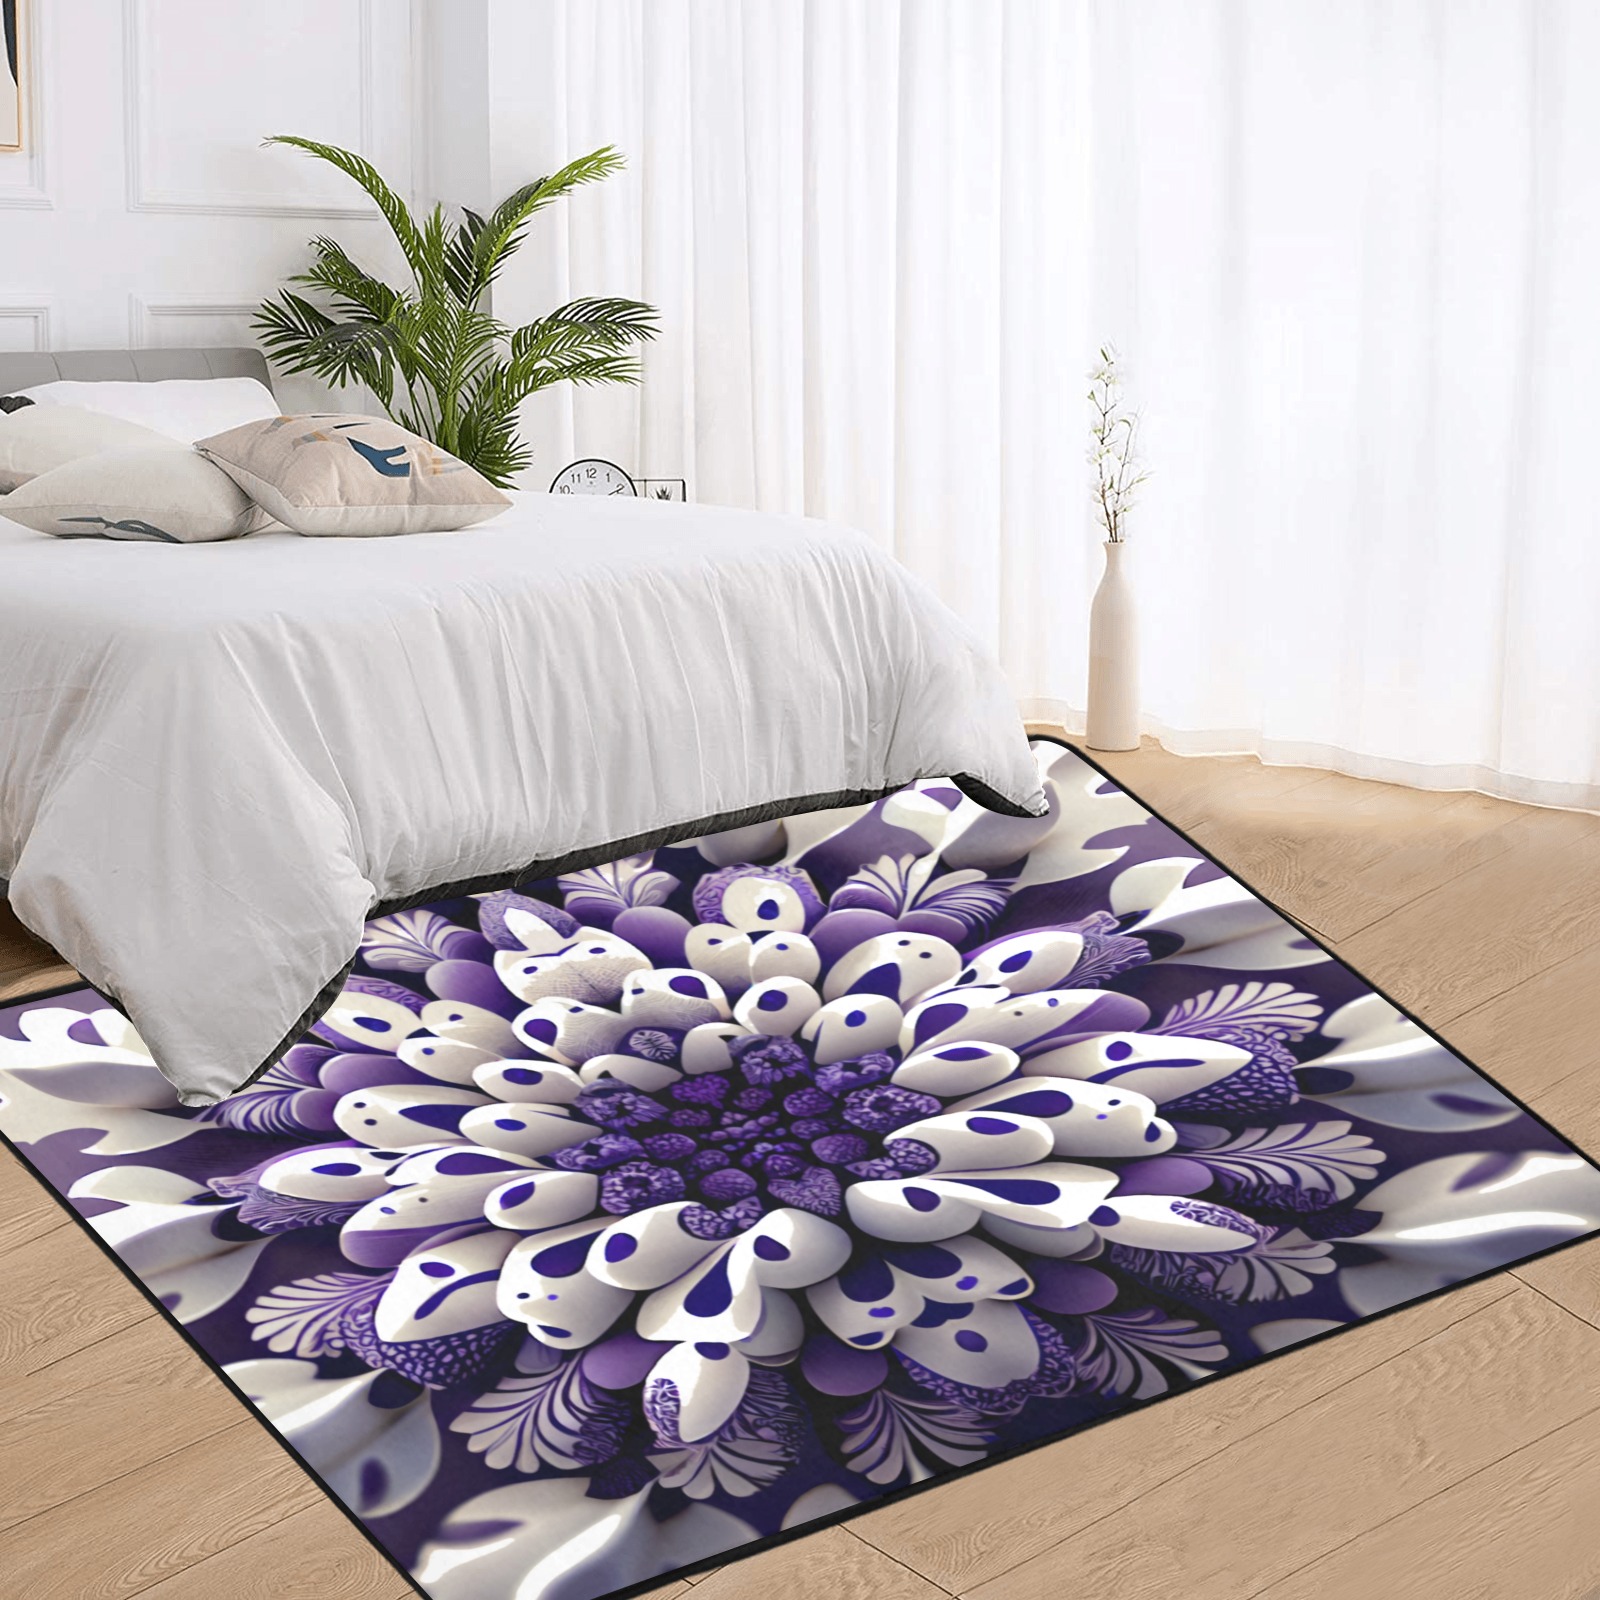 violet and white floral pattern Area Rug with Black Binding 7'x5'